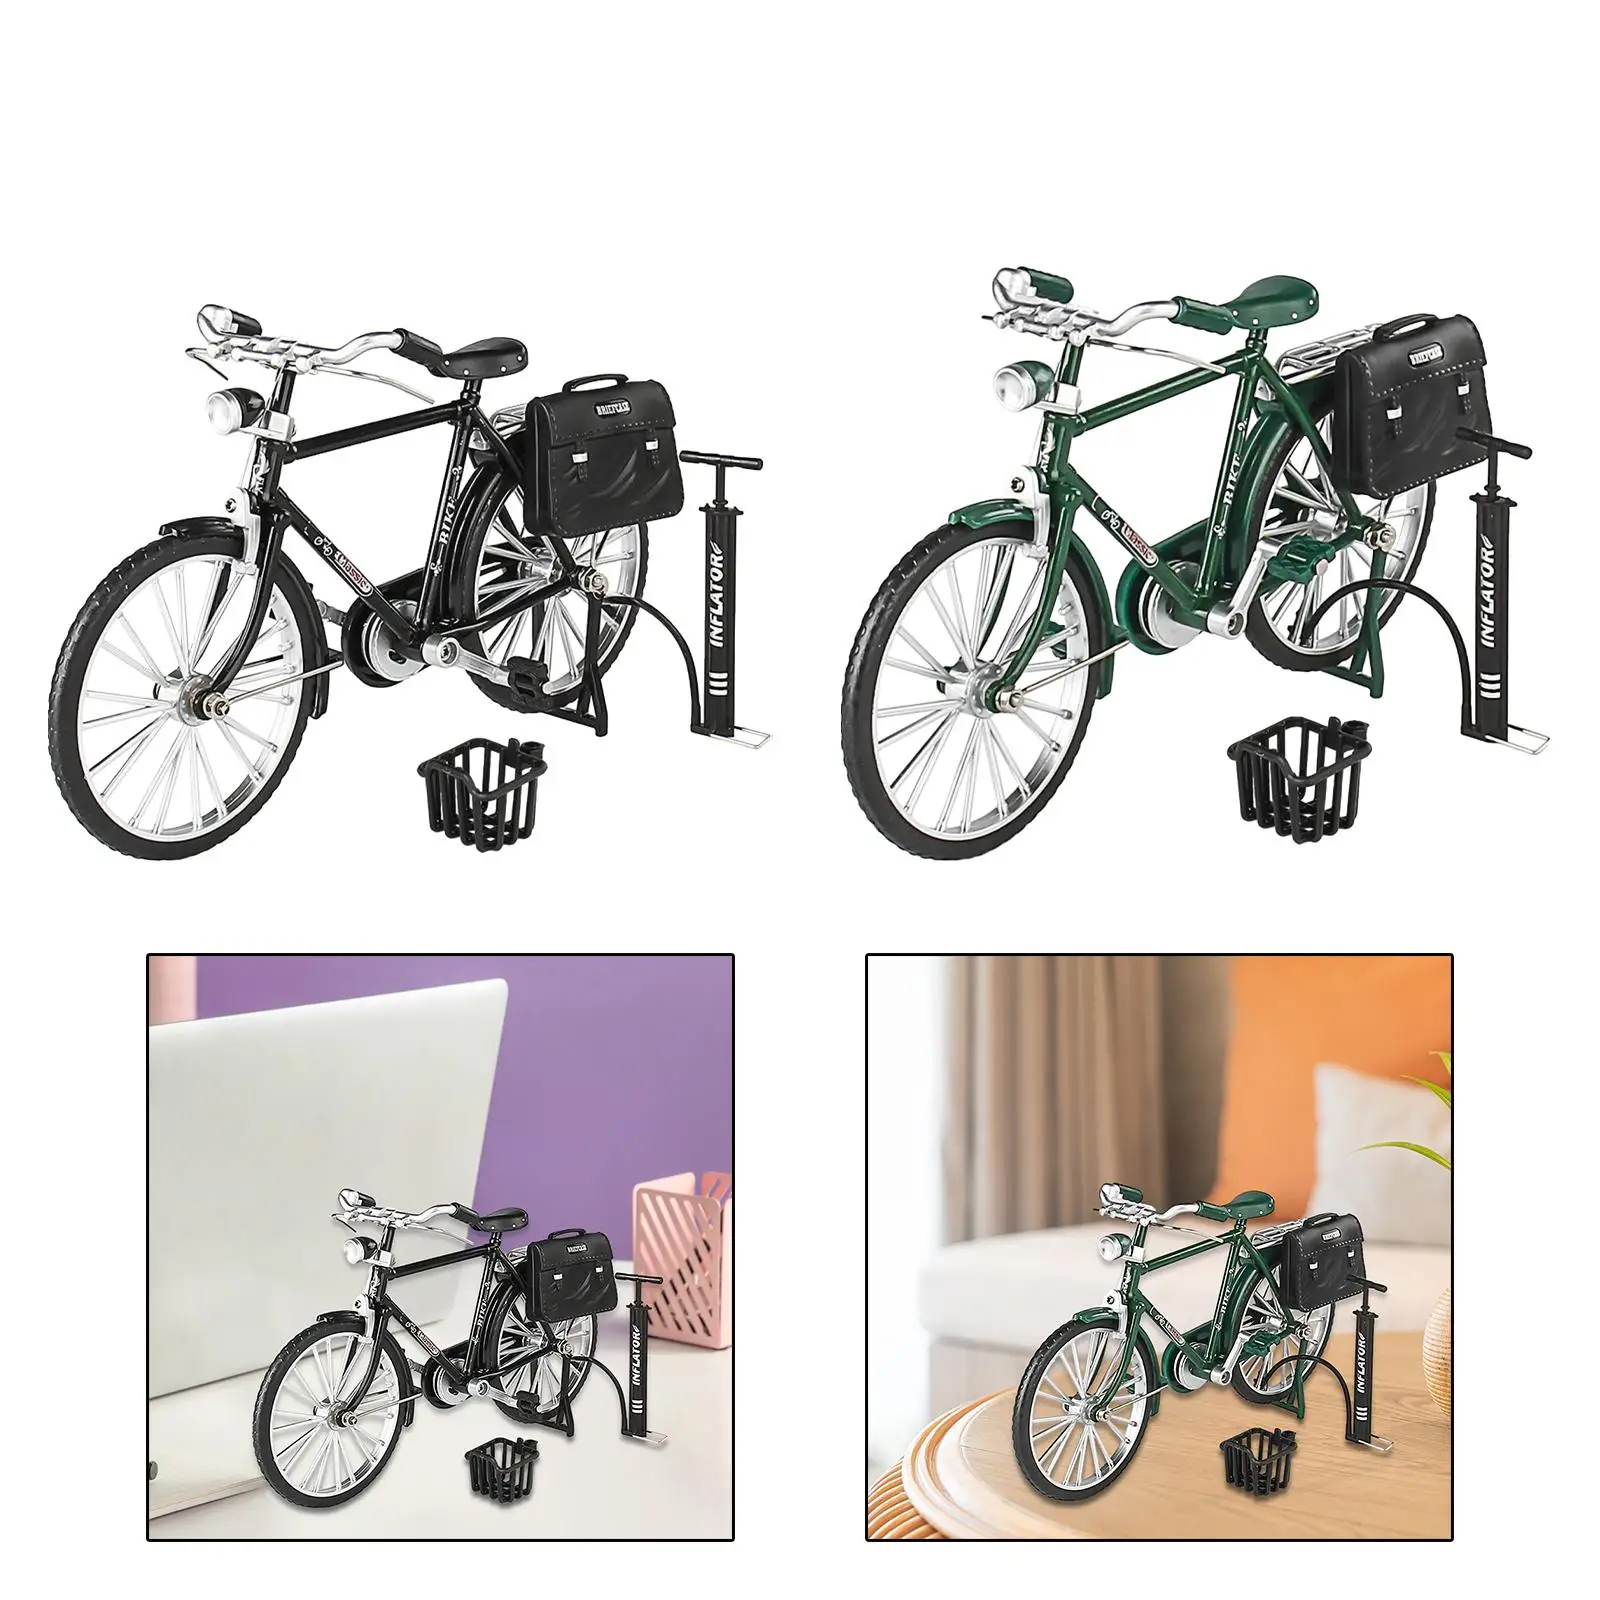 1/10 Scale Bike Model Desktop Decoration Crafts Retro Bicycle Model Decoration for Club Bedroom Dollhouse Tabletop Office